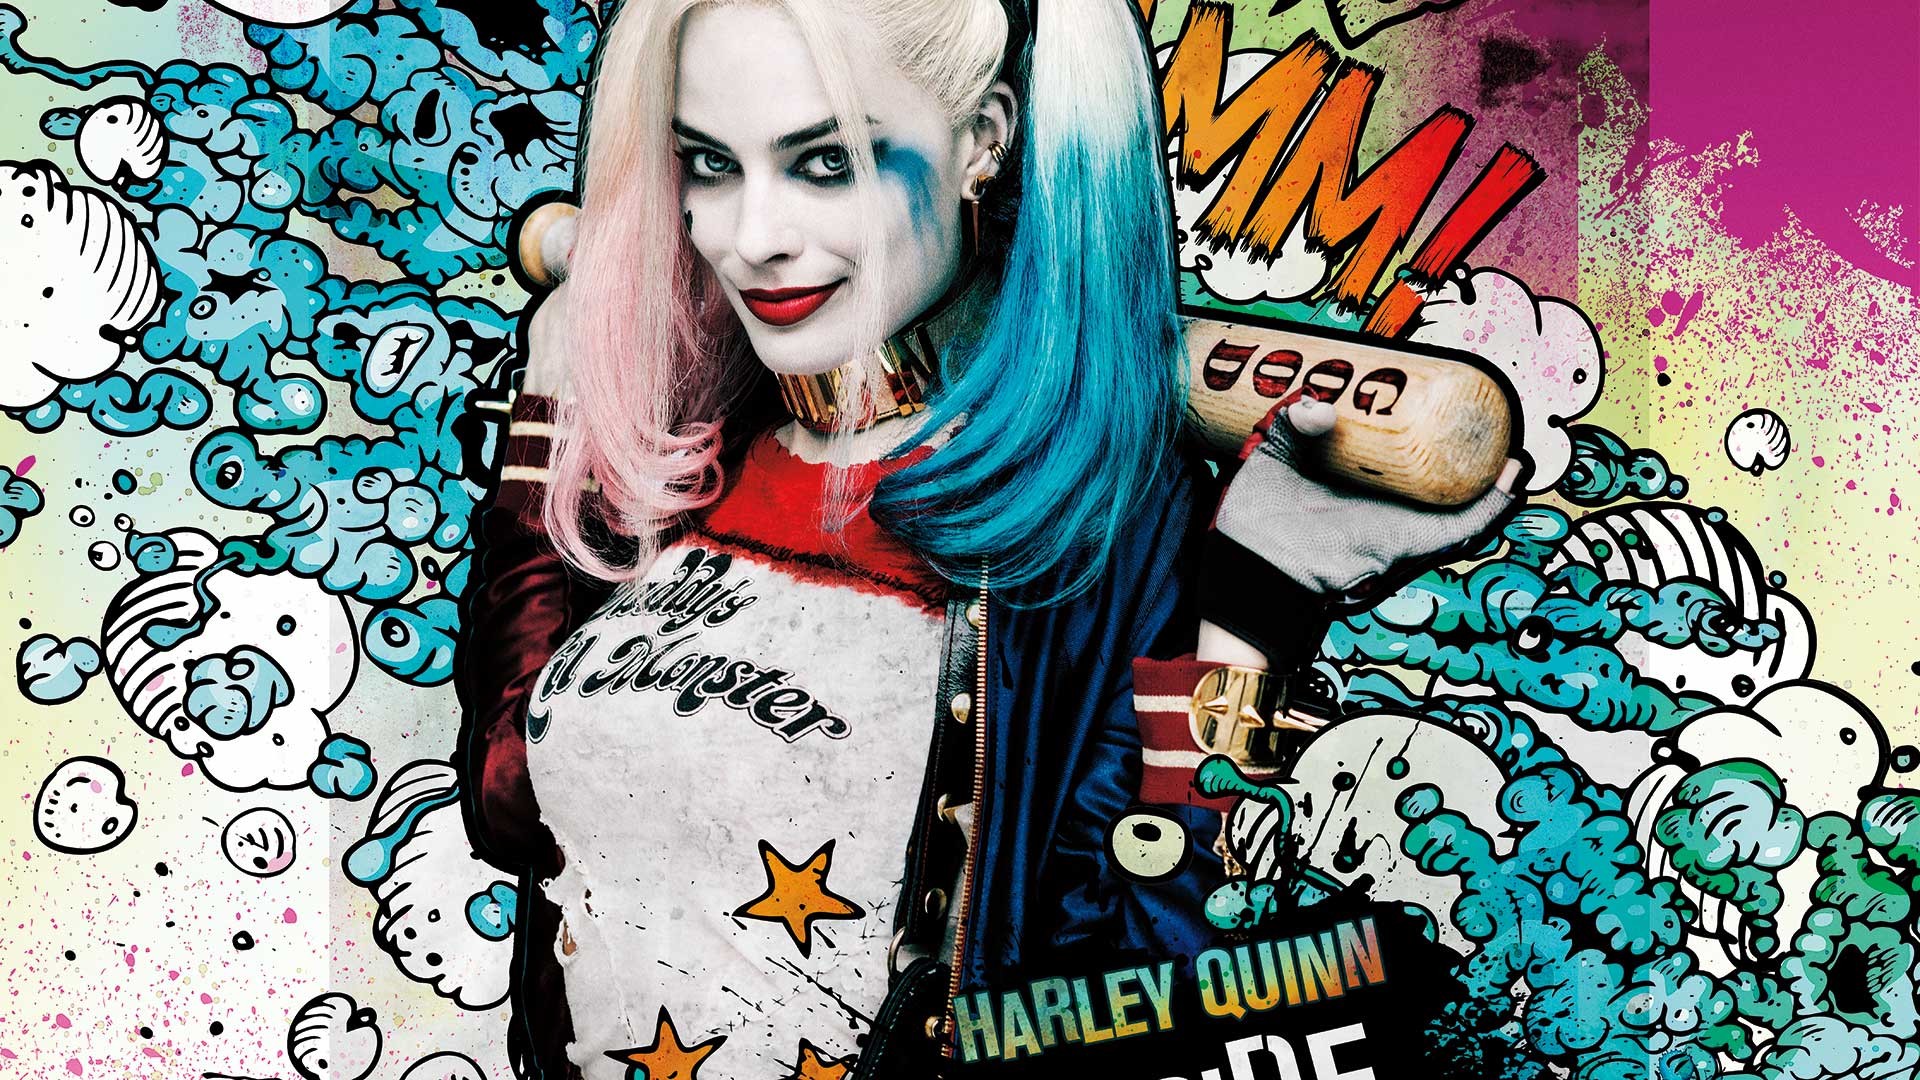 Harley Quinn HD Backgrounds With Resolution 1920X1080 pixel. You can make this wallpaper for your Desktop Computer Backgrounds, Mac Wallpapers, Android Lock screen or iPhone Screensavers